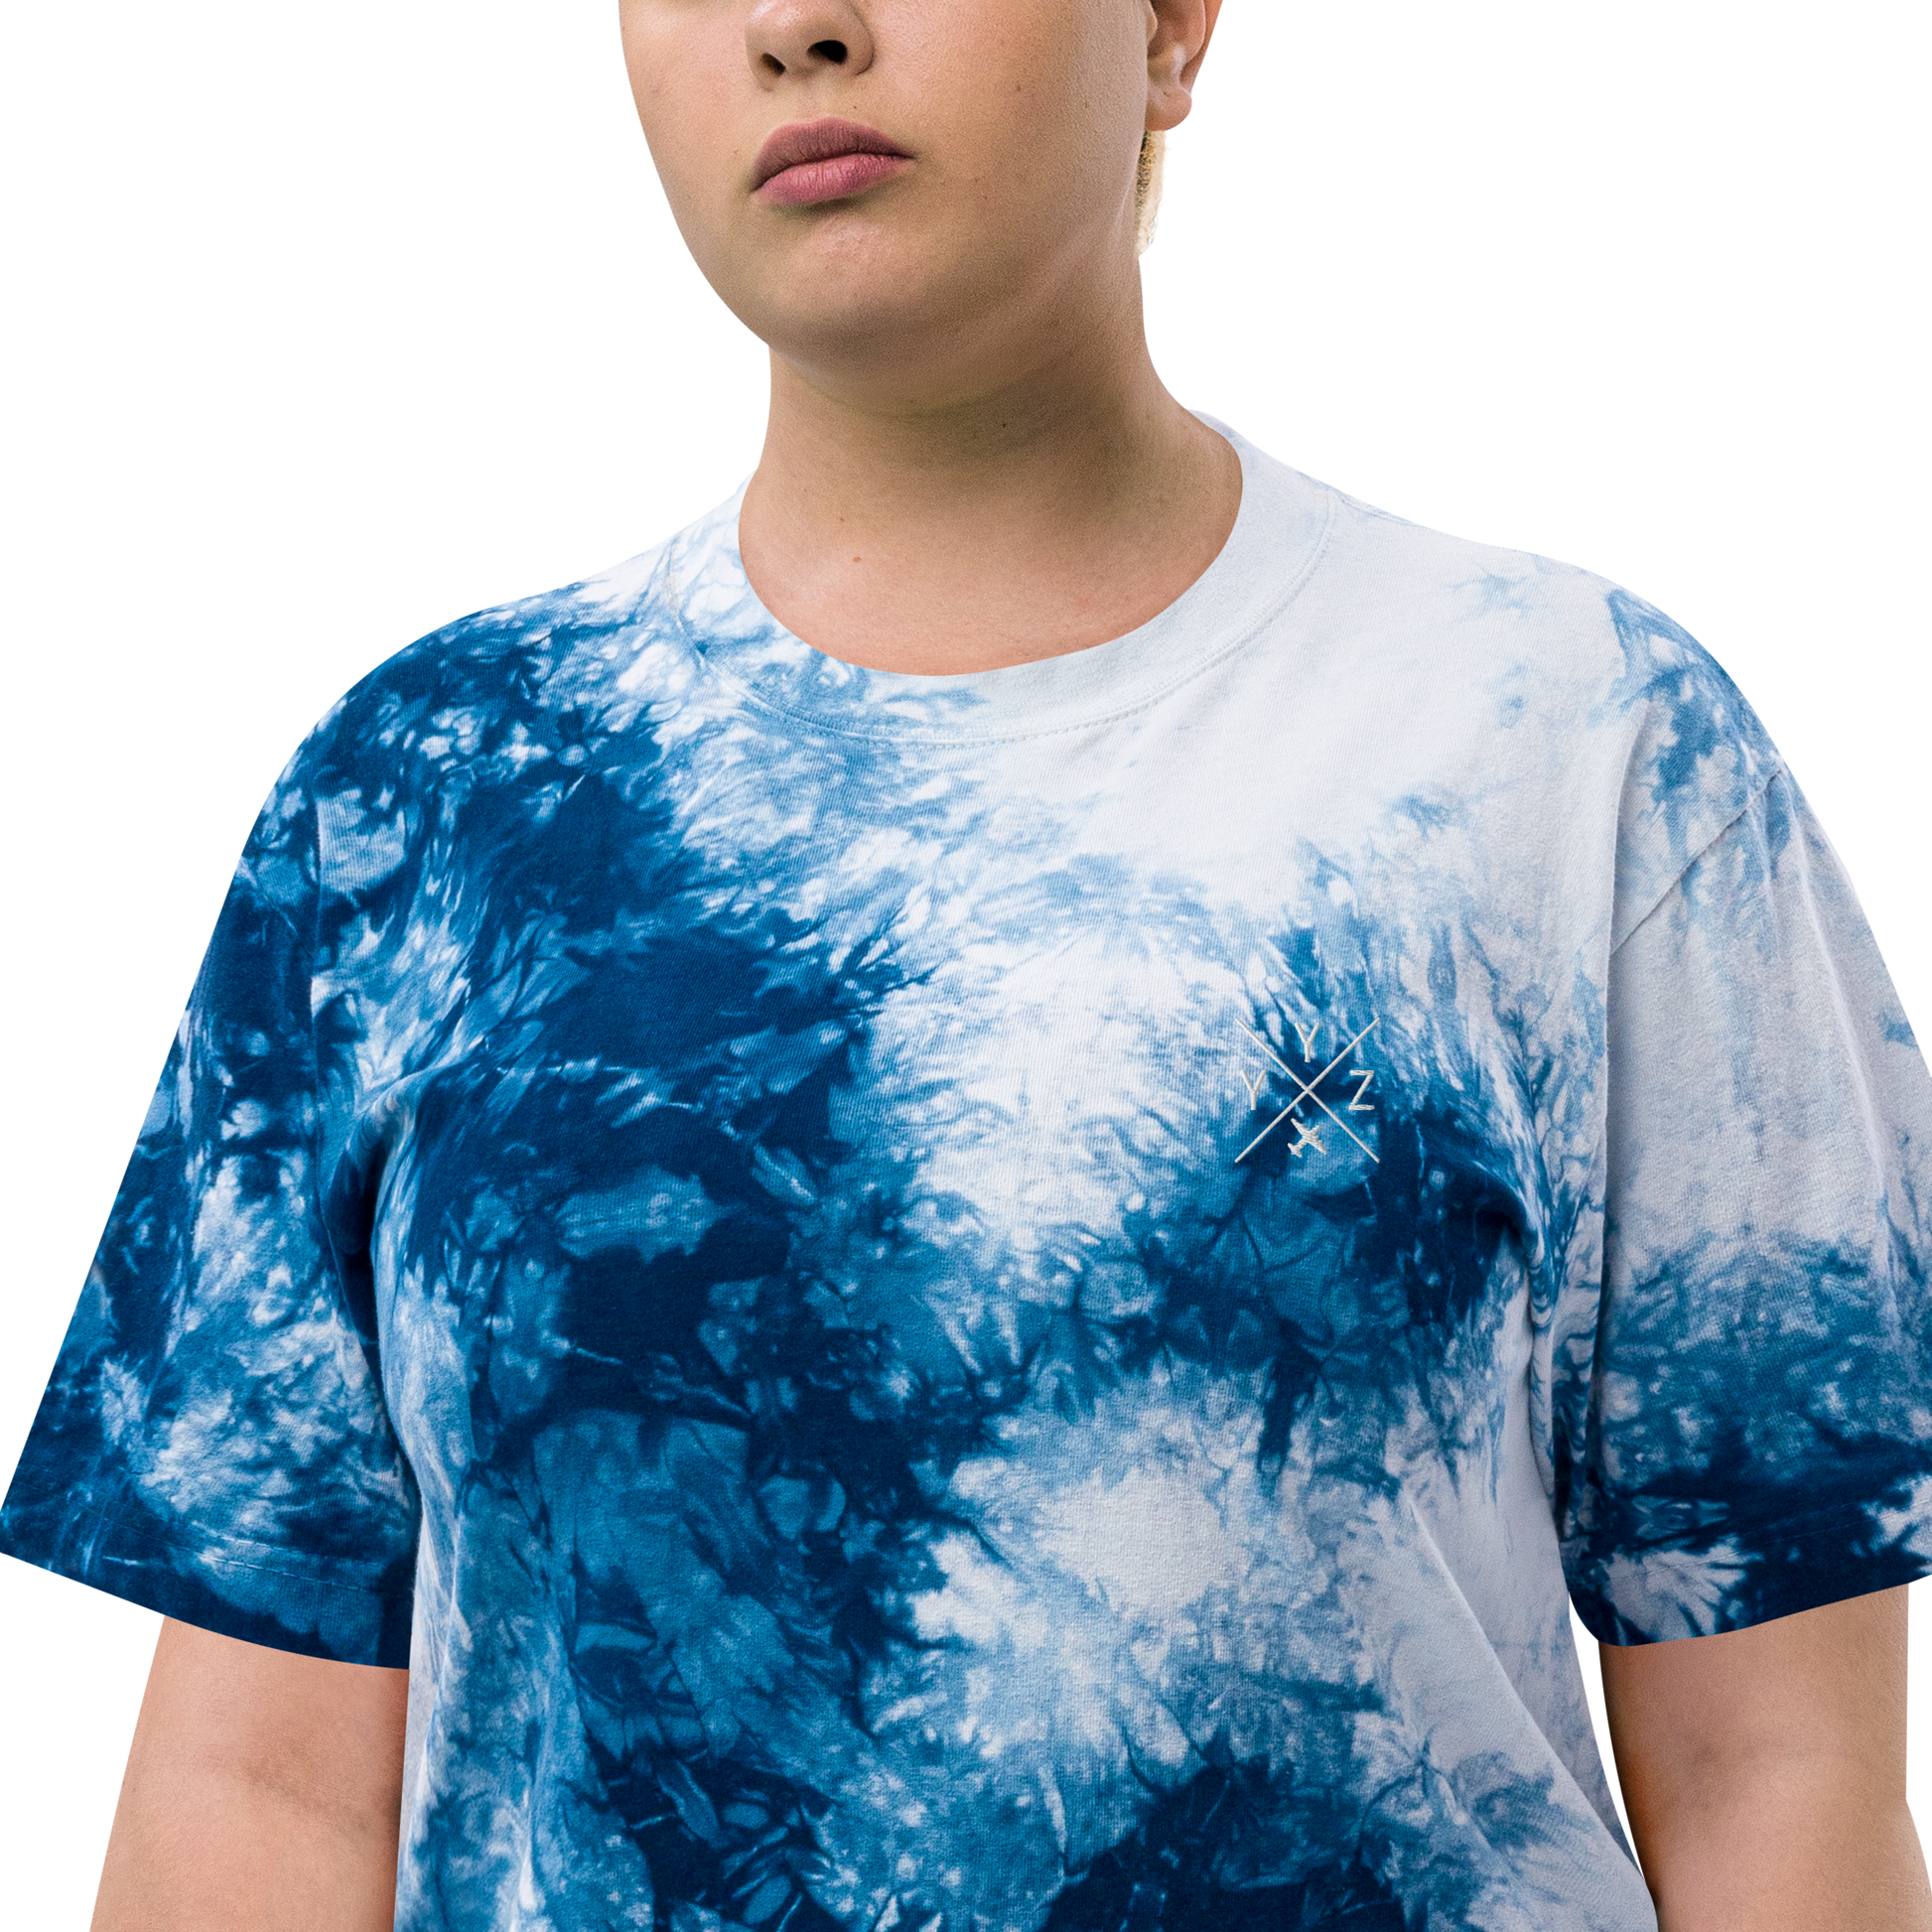 YHM Designs - YYZ Toronto Oversized Tie-Dye T-Shirt - Crossed-X Design with Airport Code and Vintage Propliner - White Embroidery - Image 10